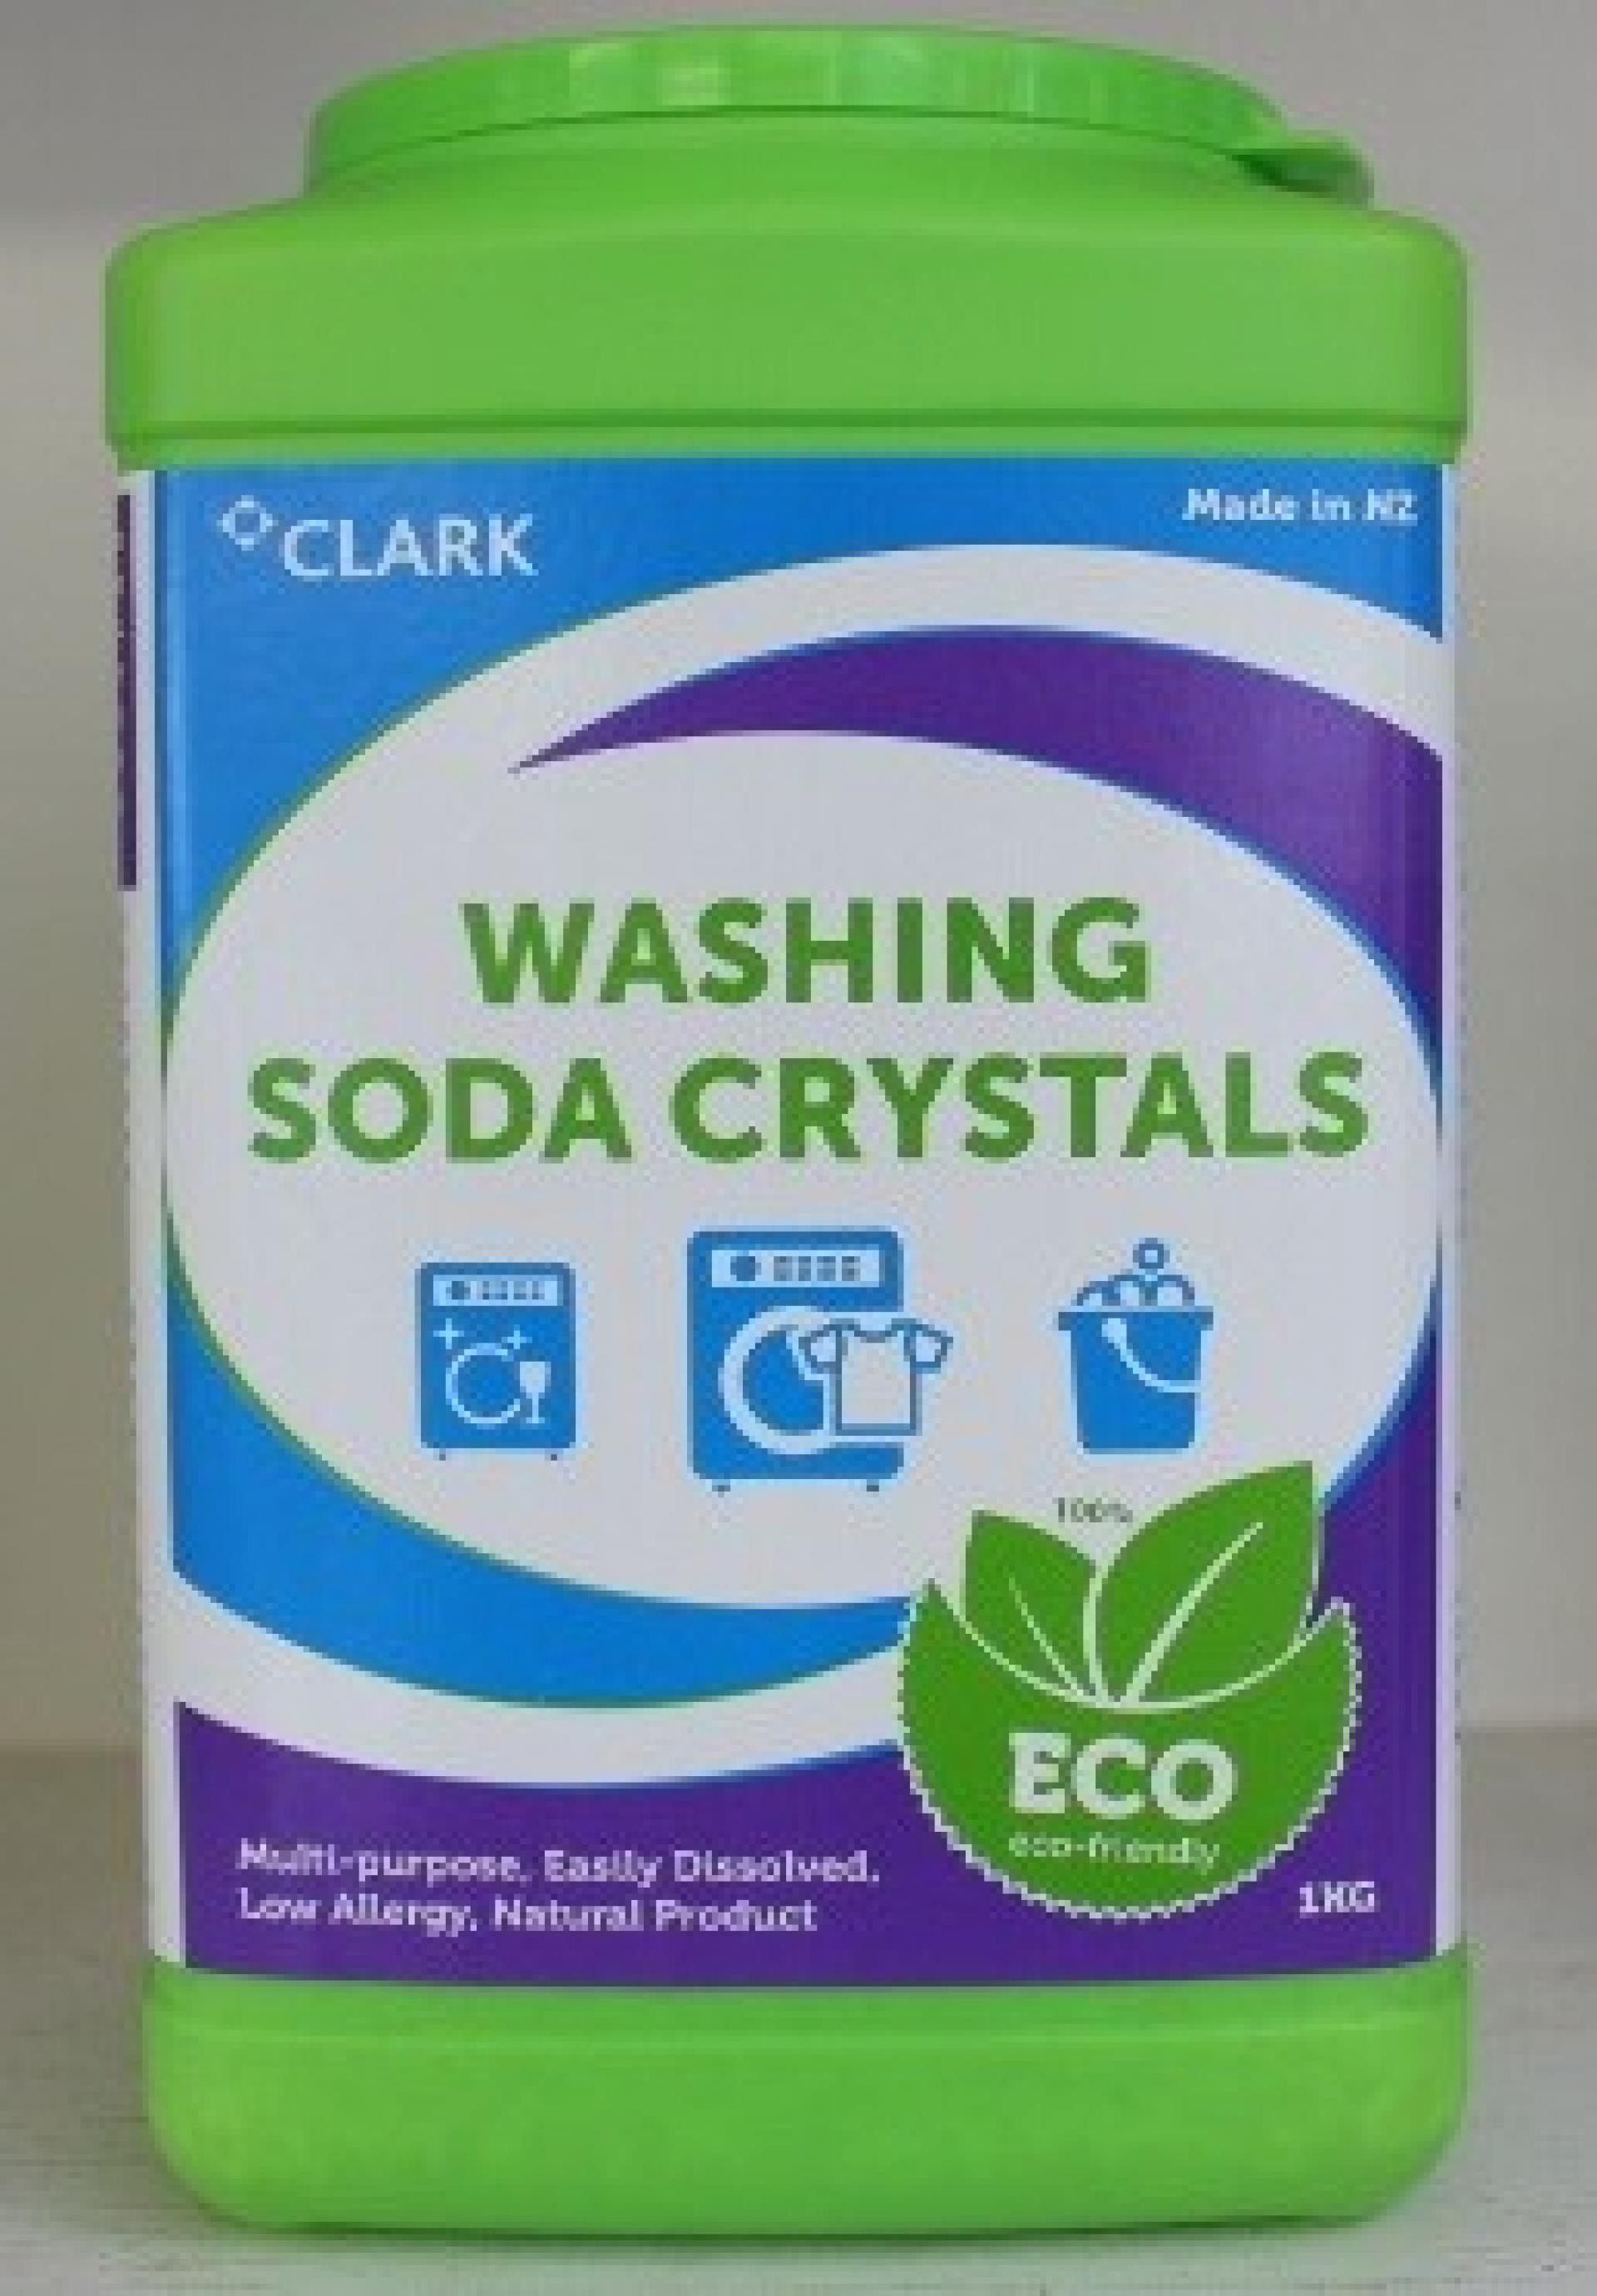 Washing Soda Crystals 1kg Sodium Carbonate Commercial Cleaning Supplies Auckland Counties Cleaning,Diy Projects For Bedroom